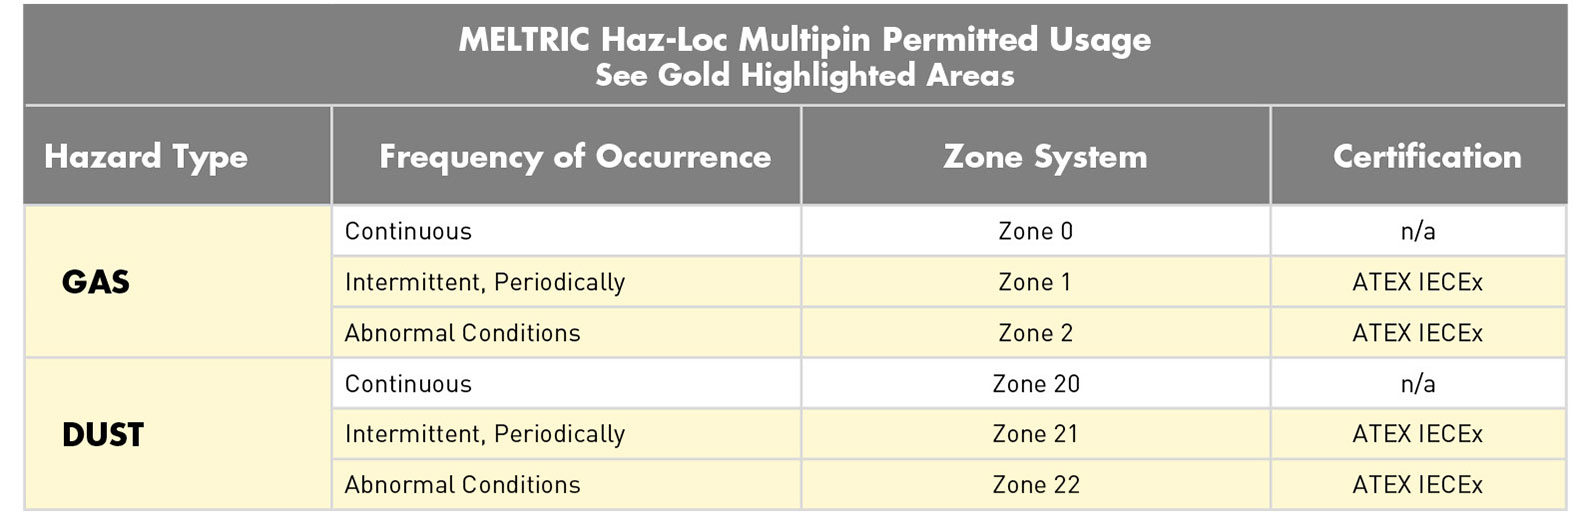 haz loc multipin permitted usage chart